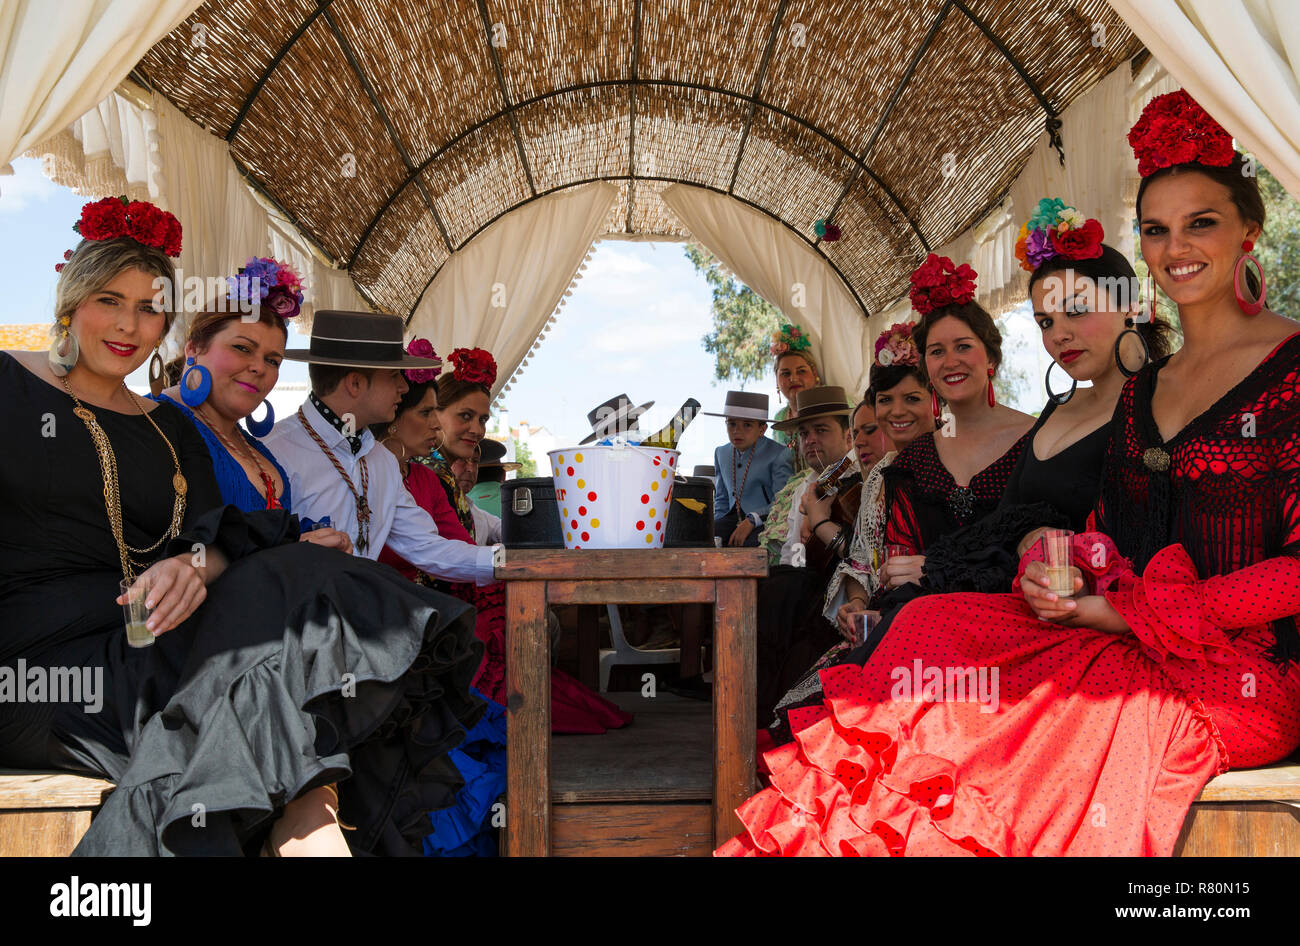 Women wearing beautifully coloured gypsy dresses and dressed up men during the annual Pentecost pilgrimage of El Rocio. Huelva province, Andalusia, Spain. Stock Photo